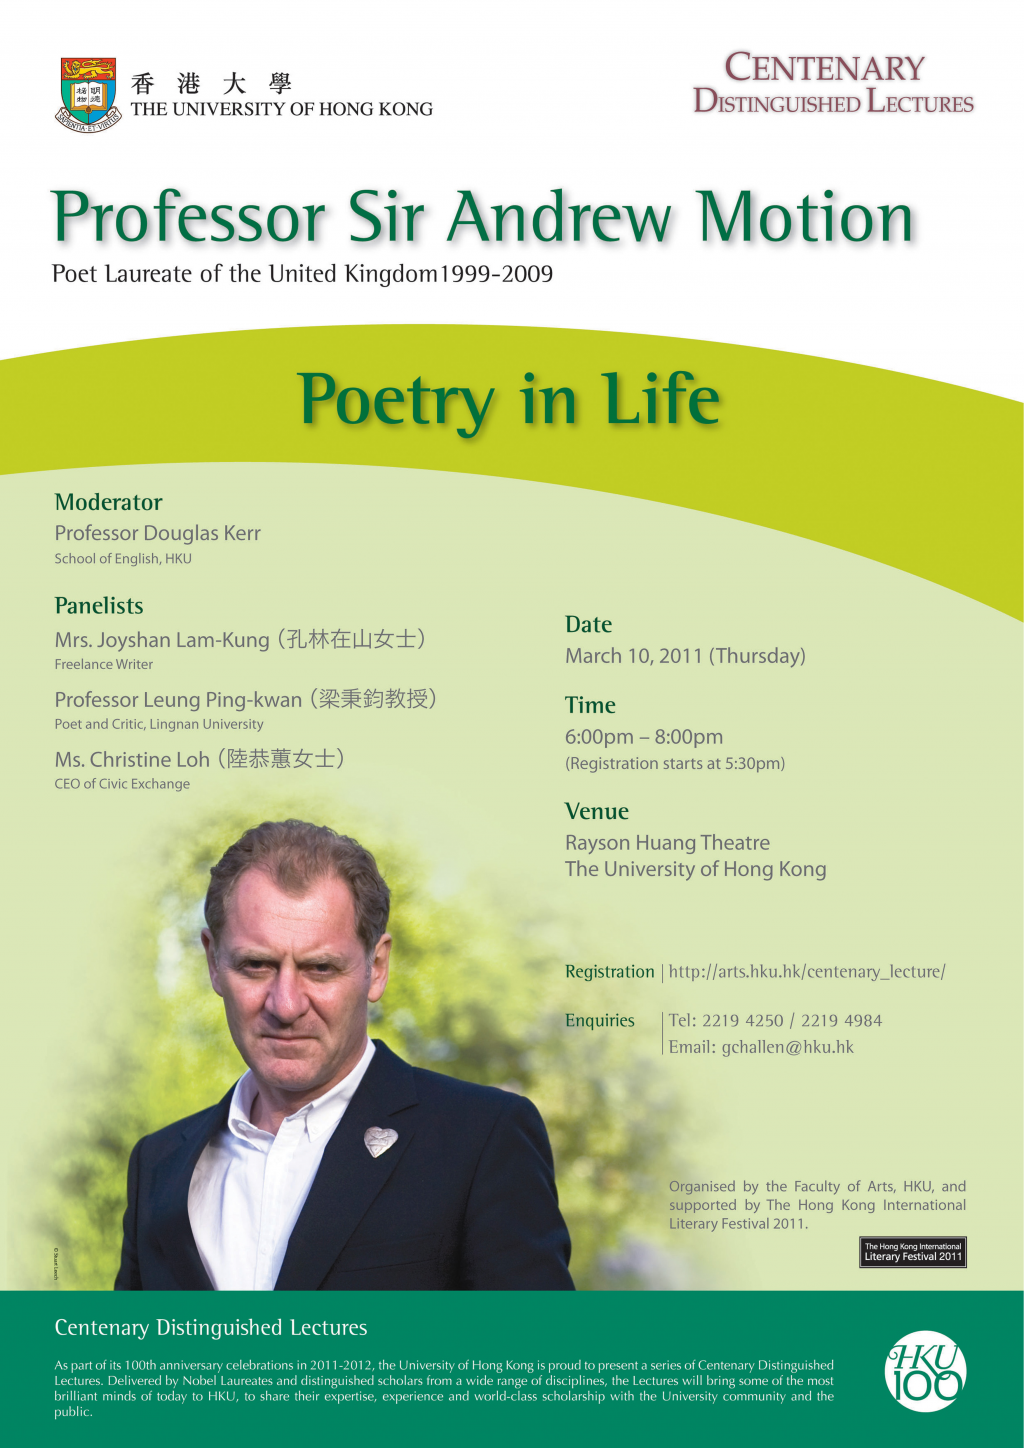 Centenary Distinguished Lecture by Professor Sir Andrew Motion